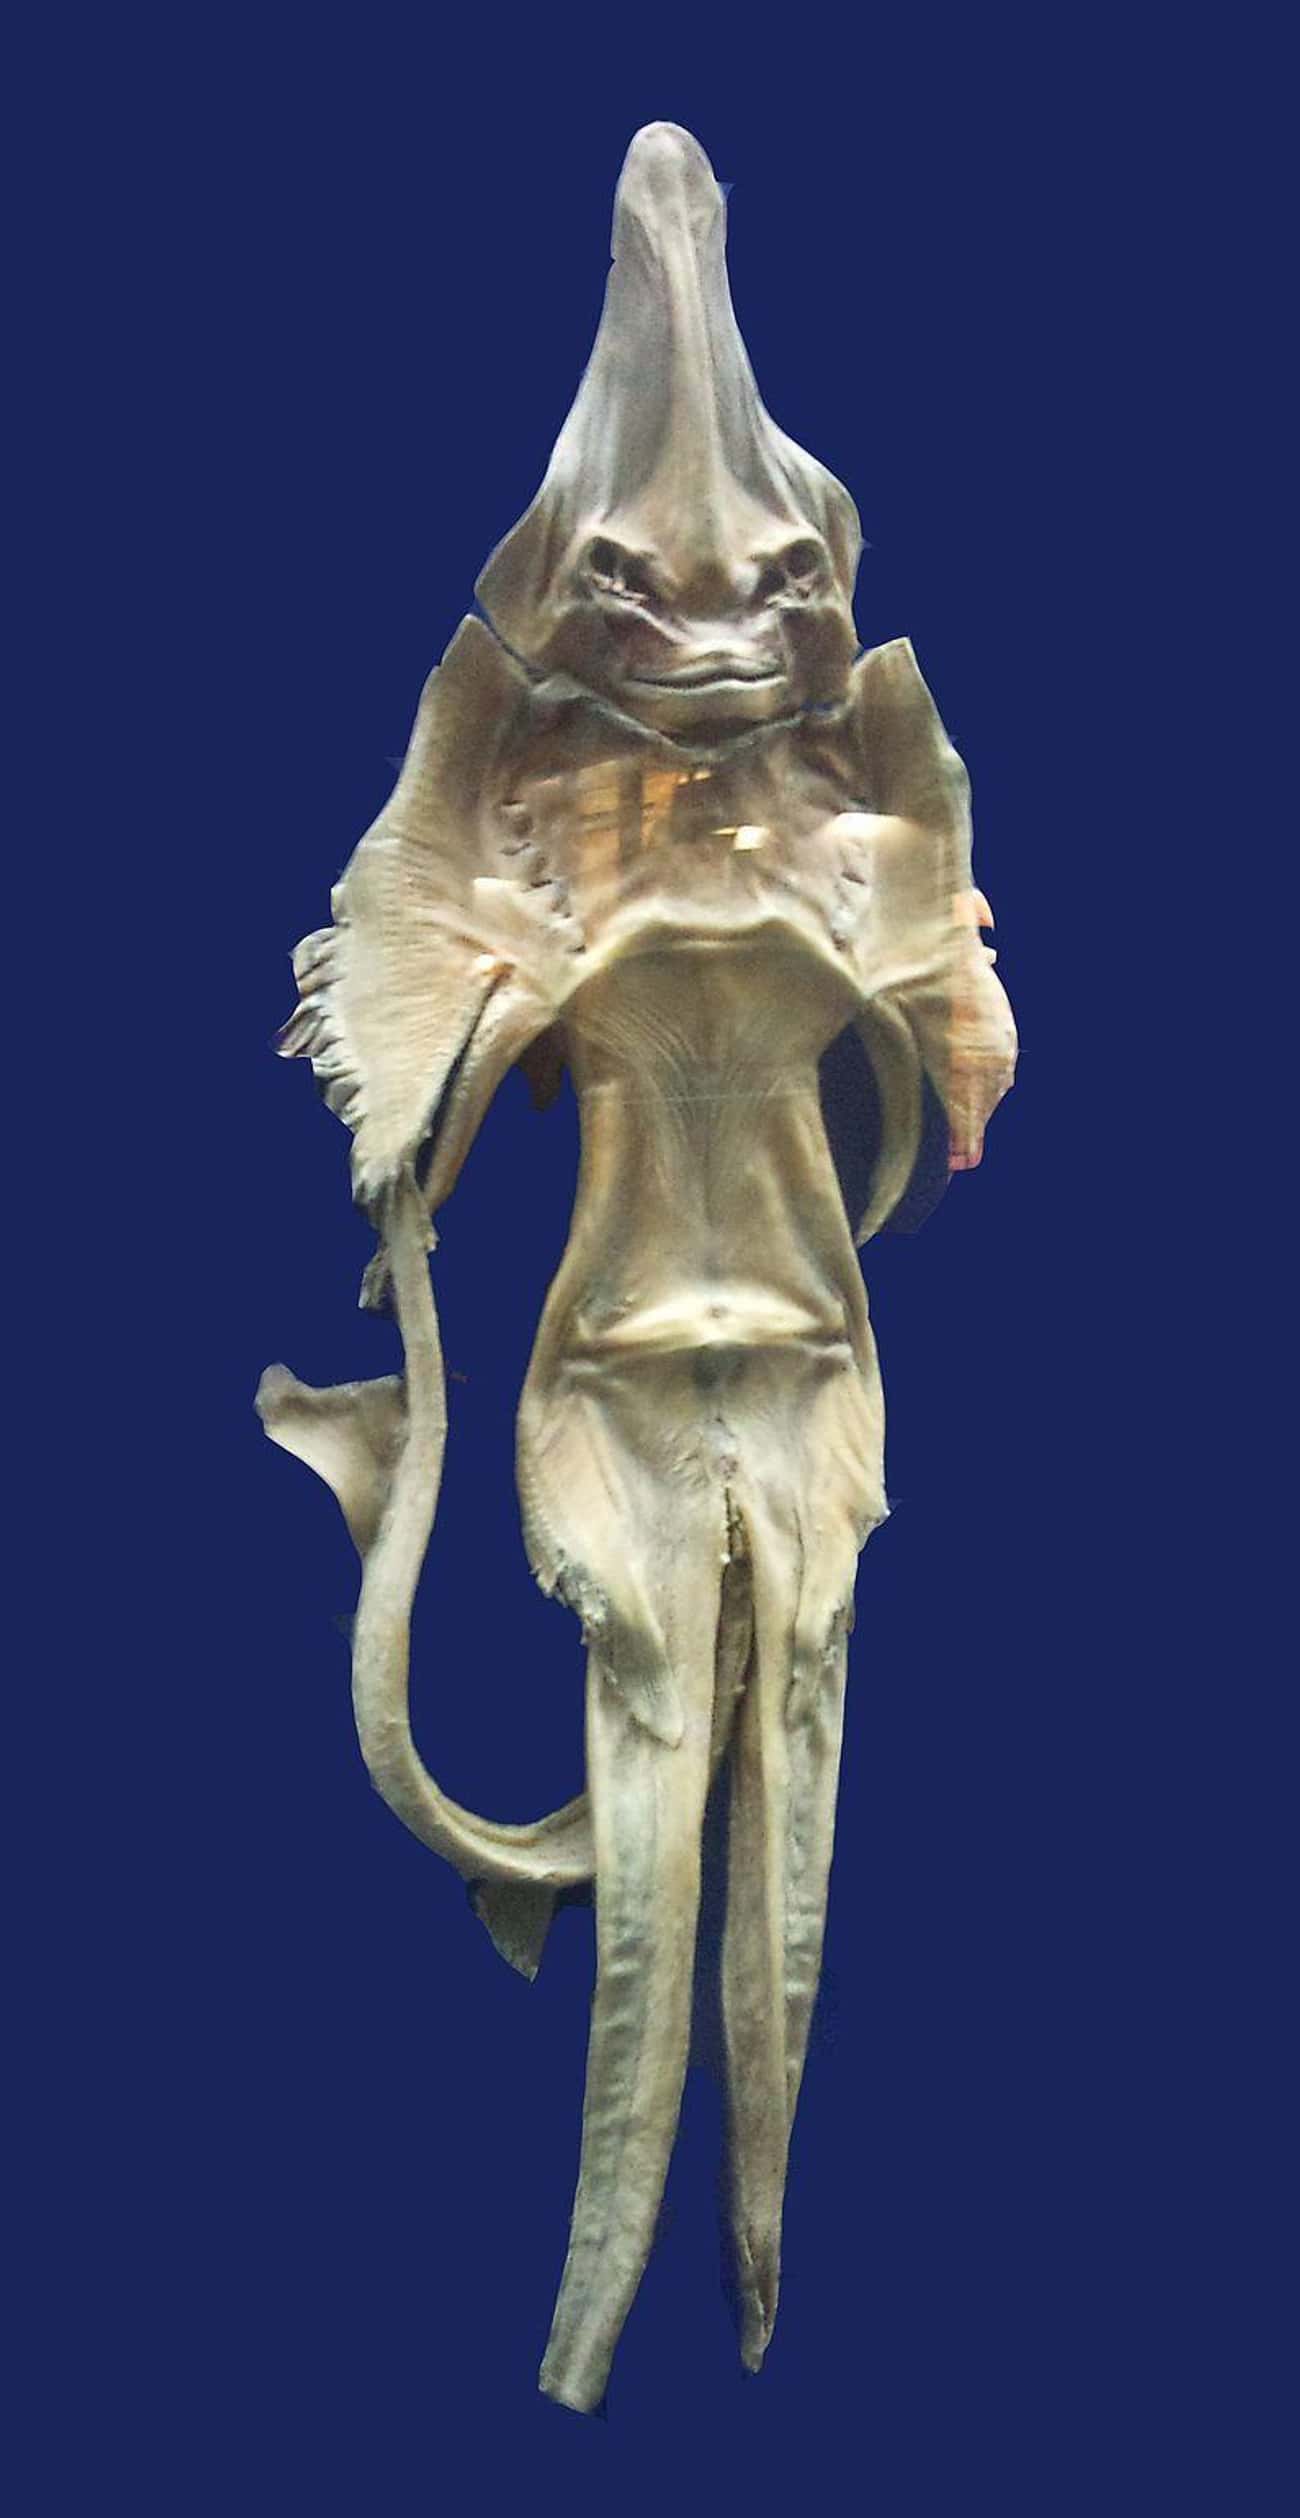 Sailors Collected Little 'Mermaids' Called Jenny Hanivers In The 1500s